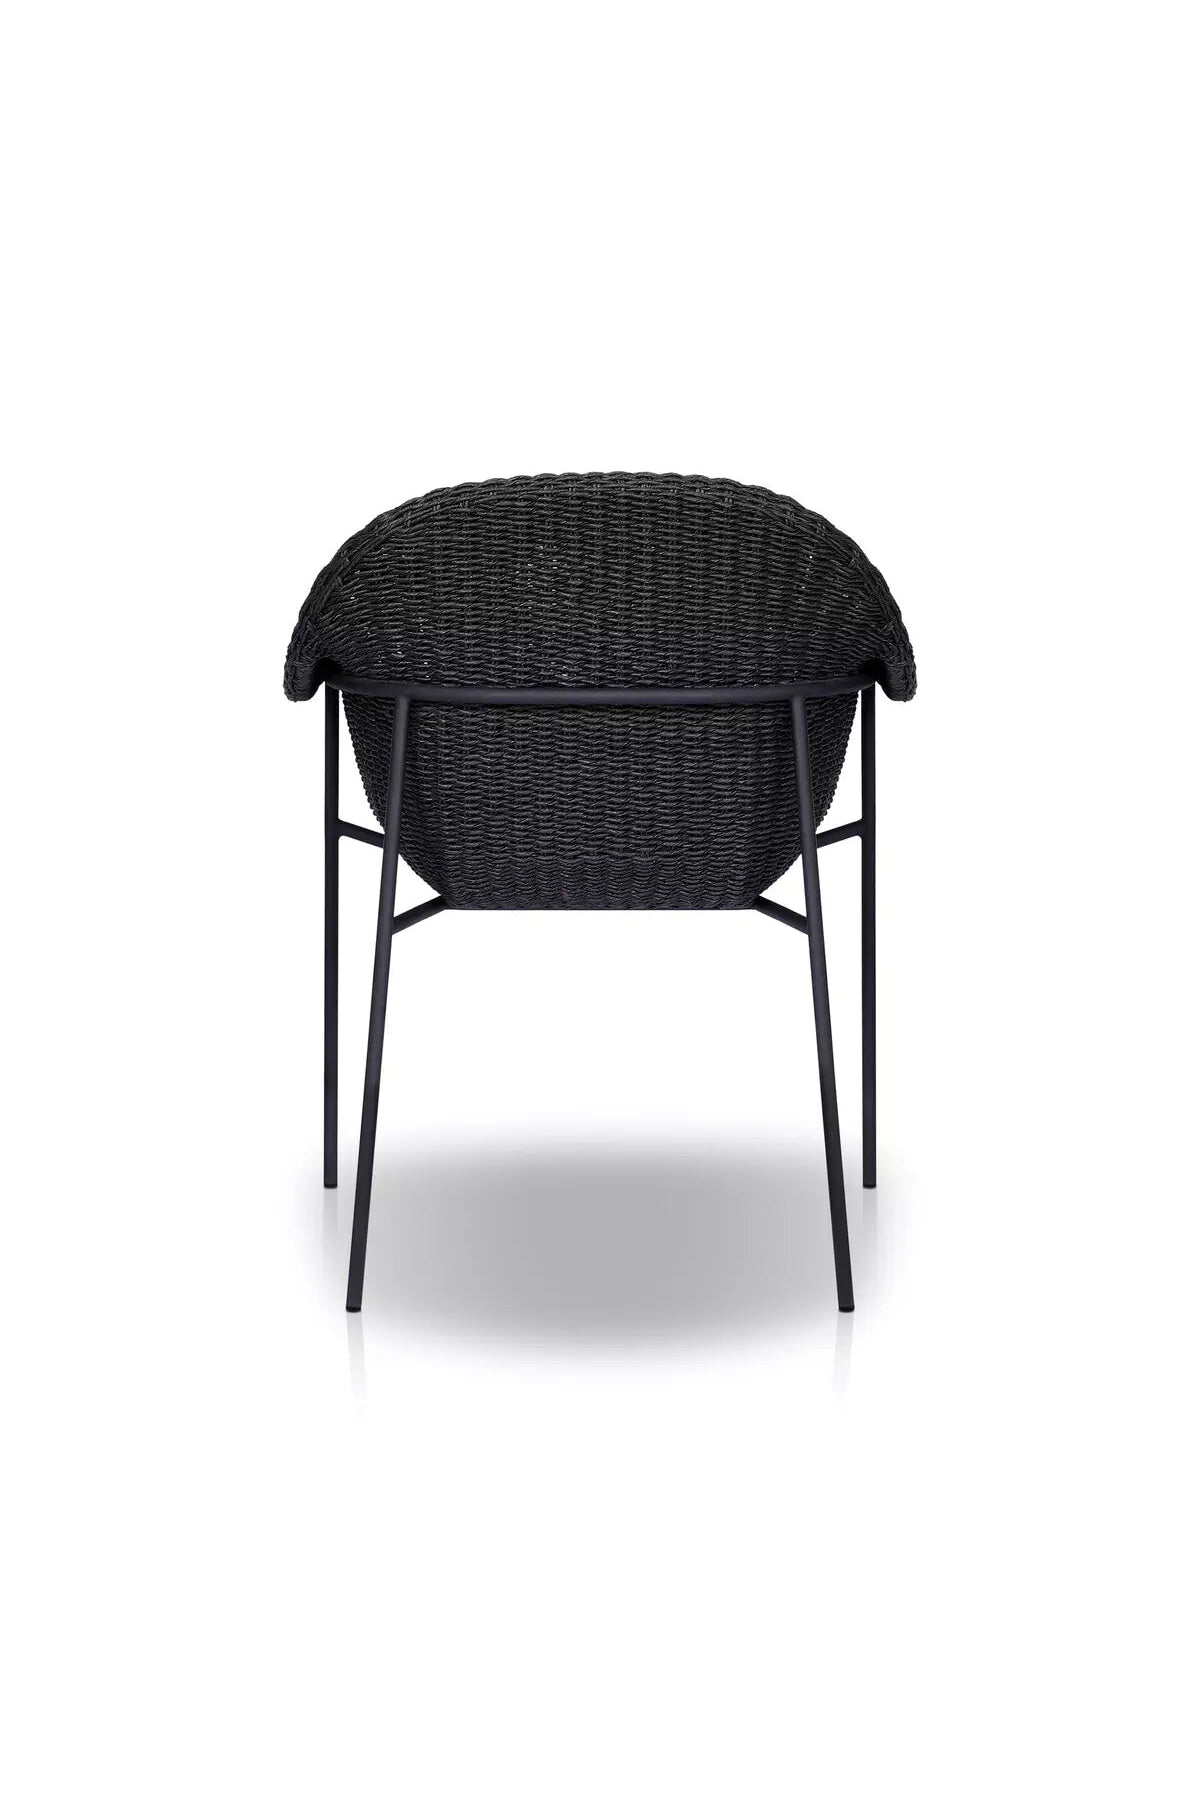 Dominica Outdoor Dining Chair - 2 Colors